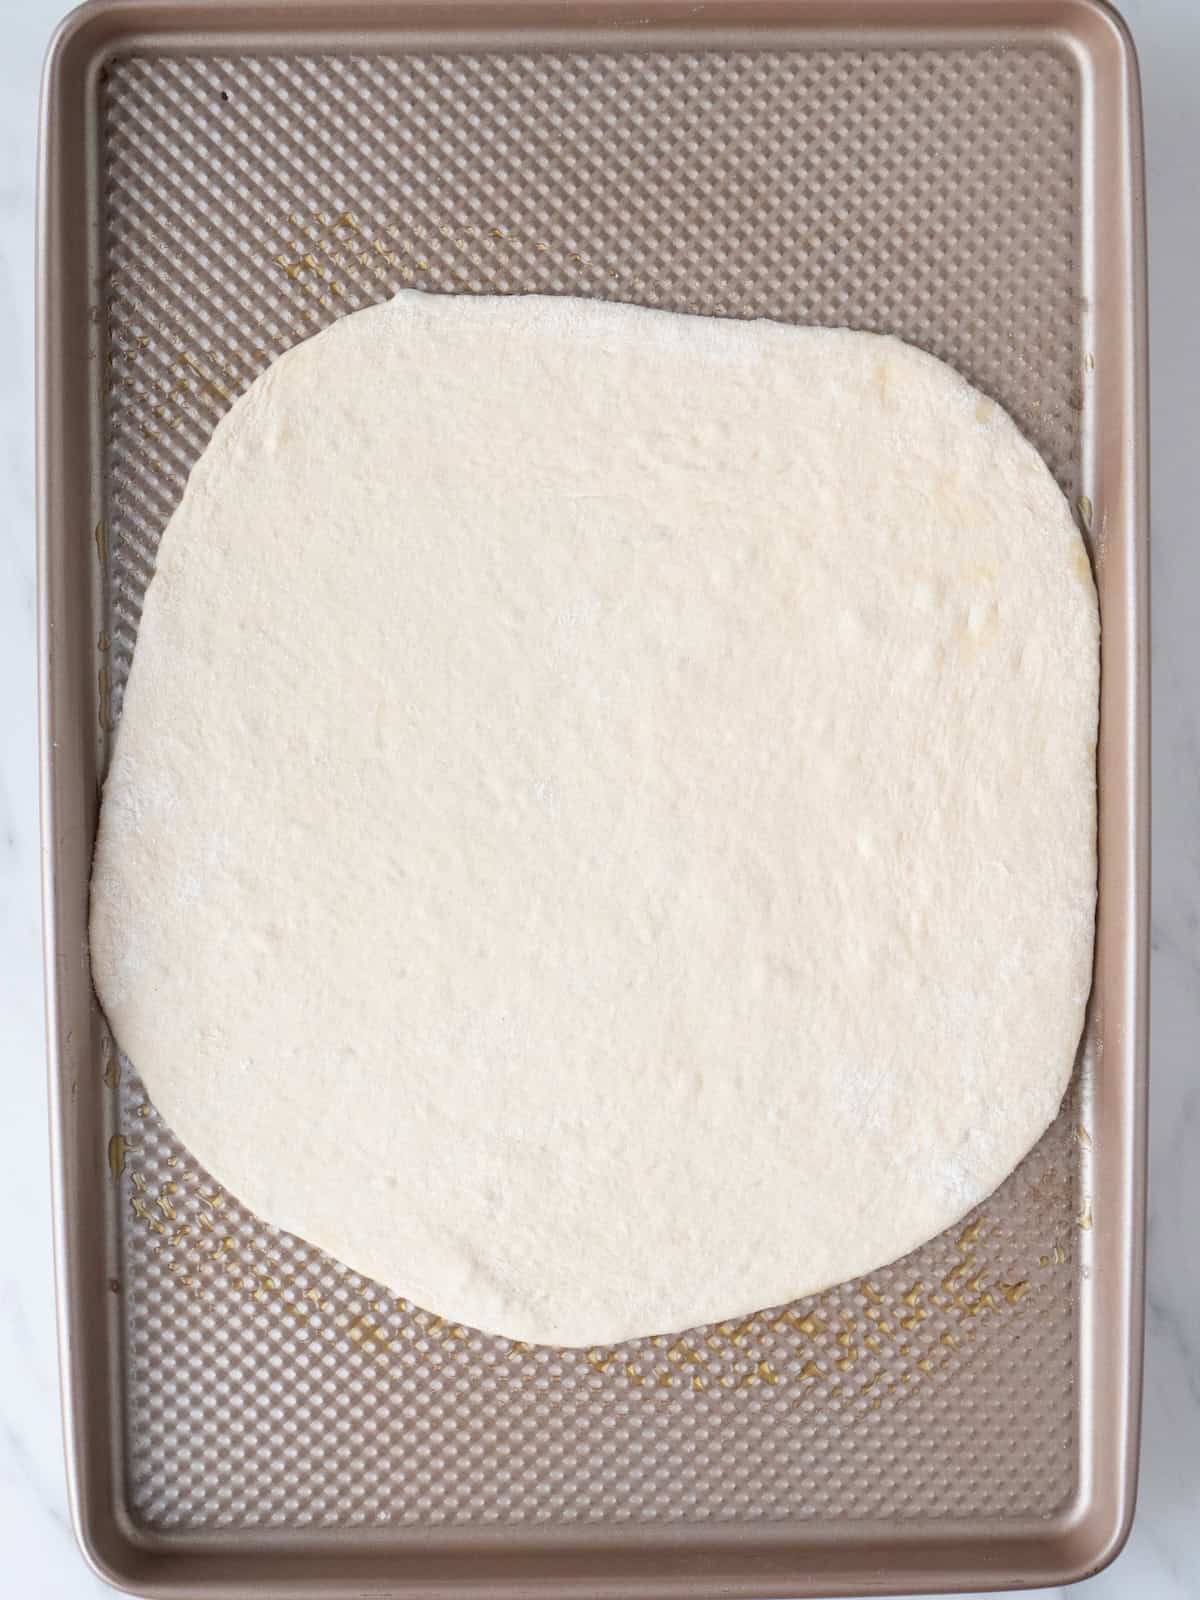 A baking sheet with a rolled out pizza dough.